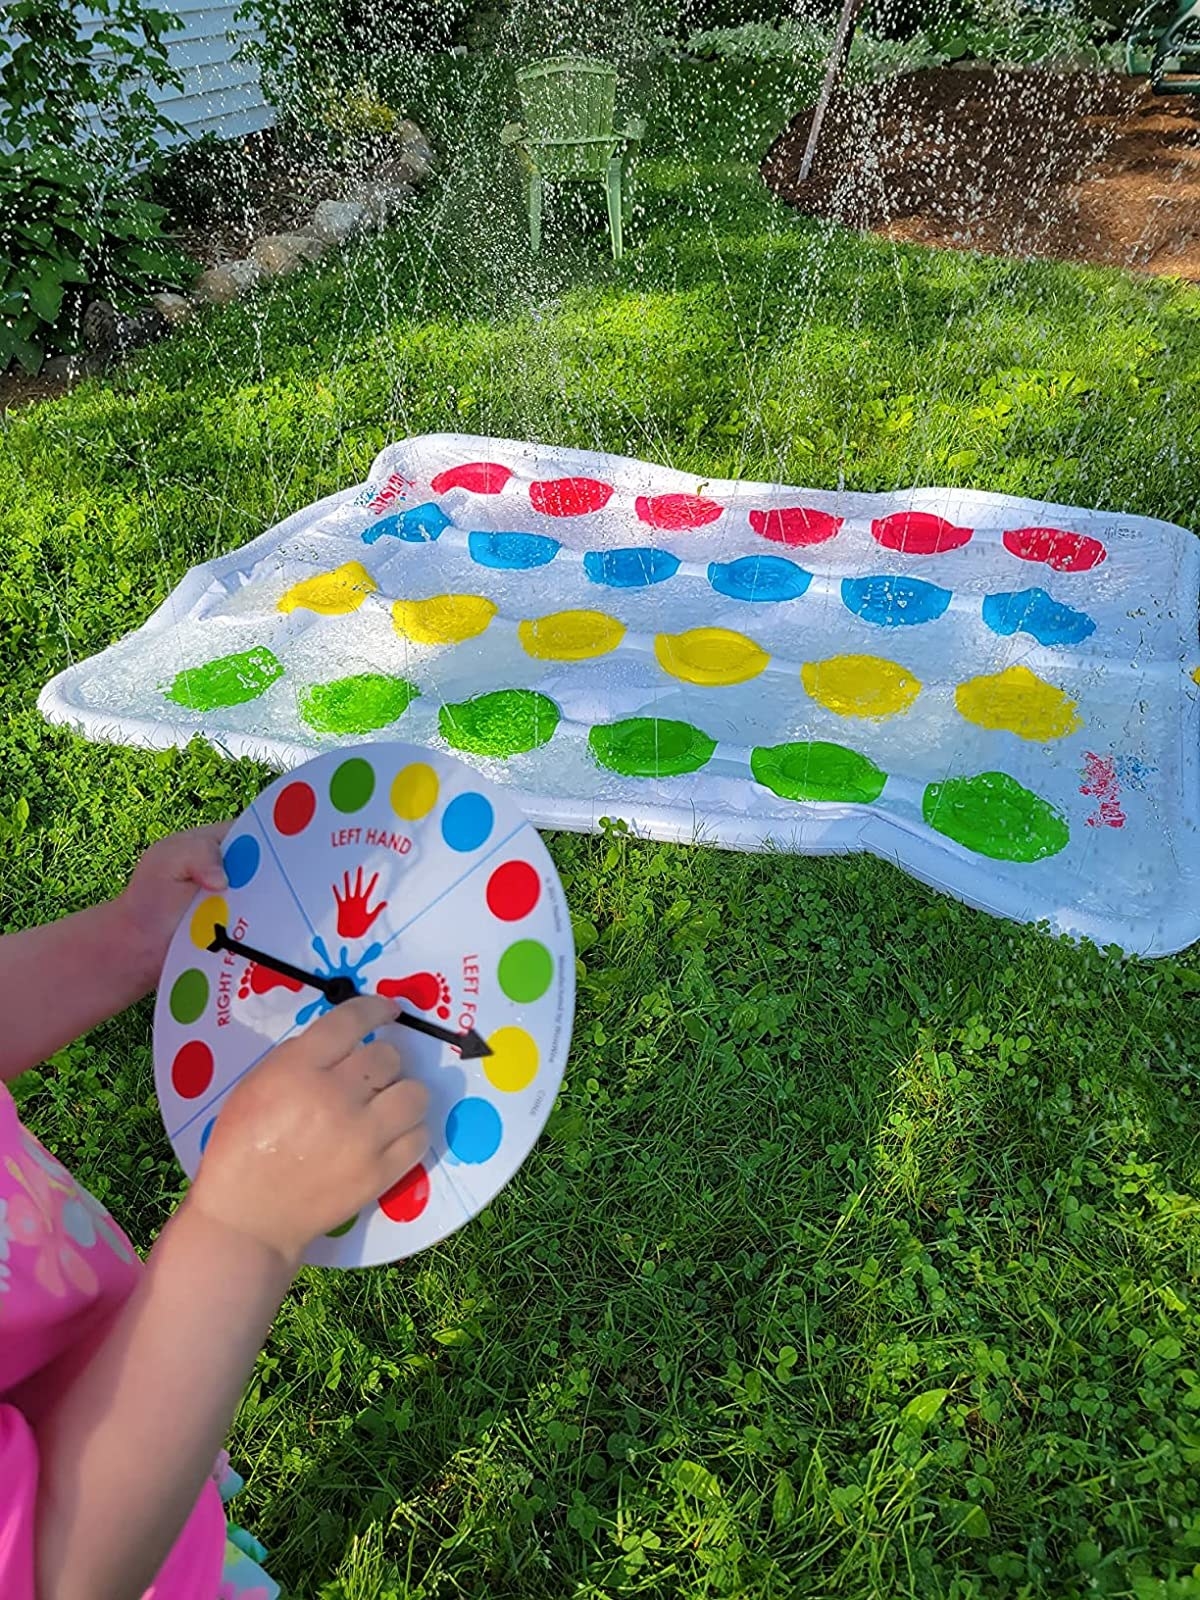 Kid using spinner for Twister game